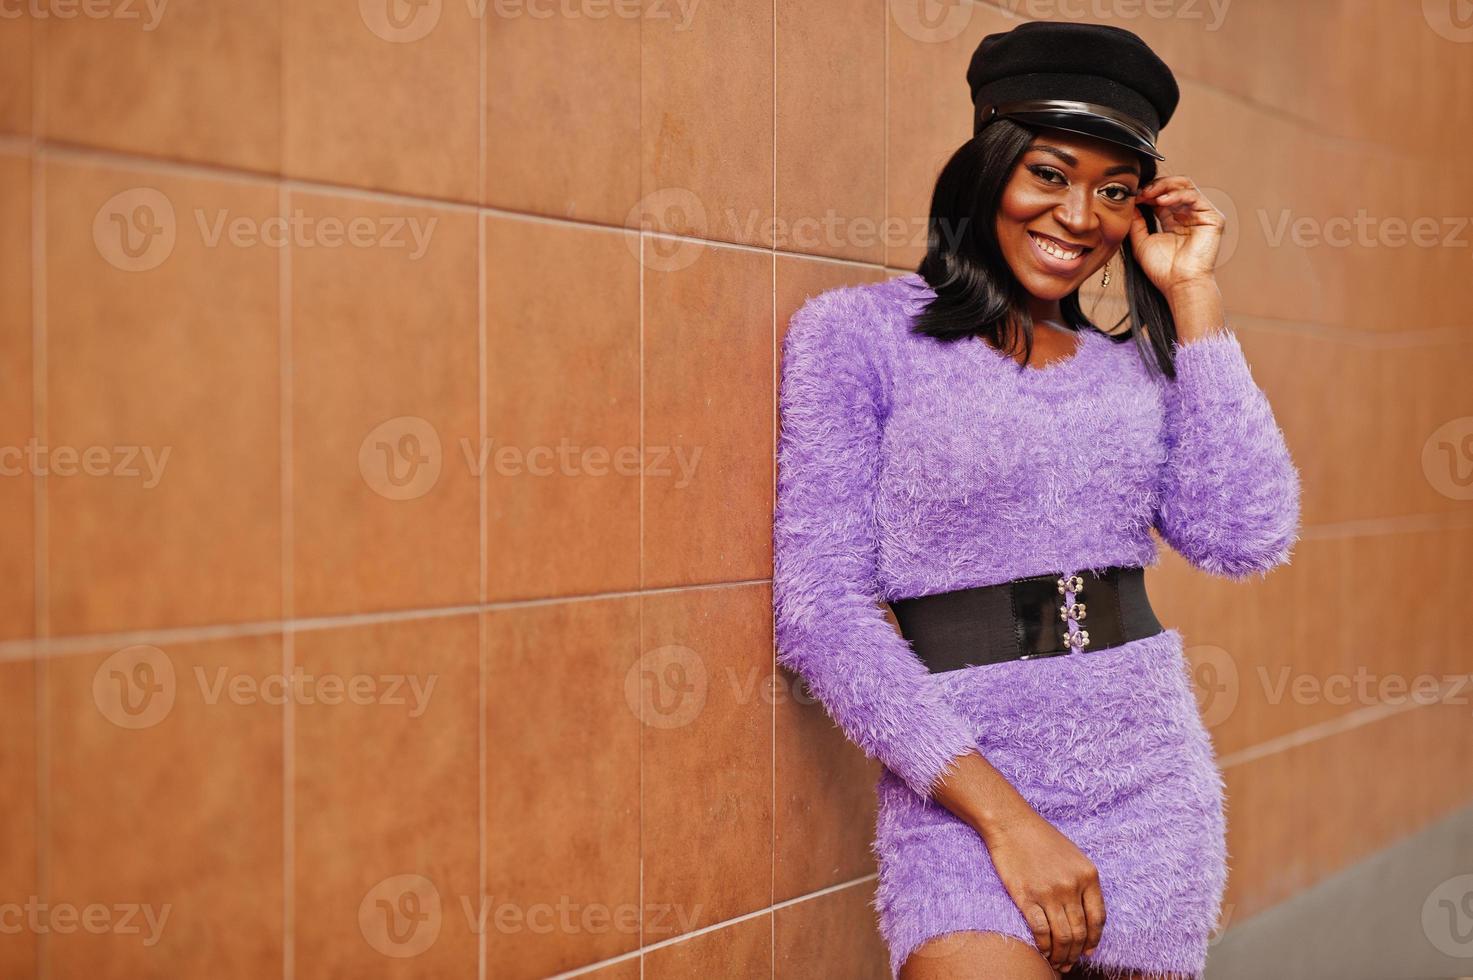 African american woman at violet dress and cap posed outdoor against orange wall. photo